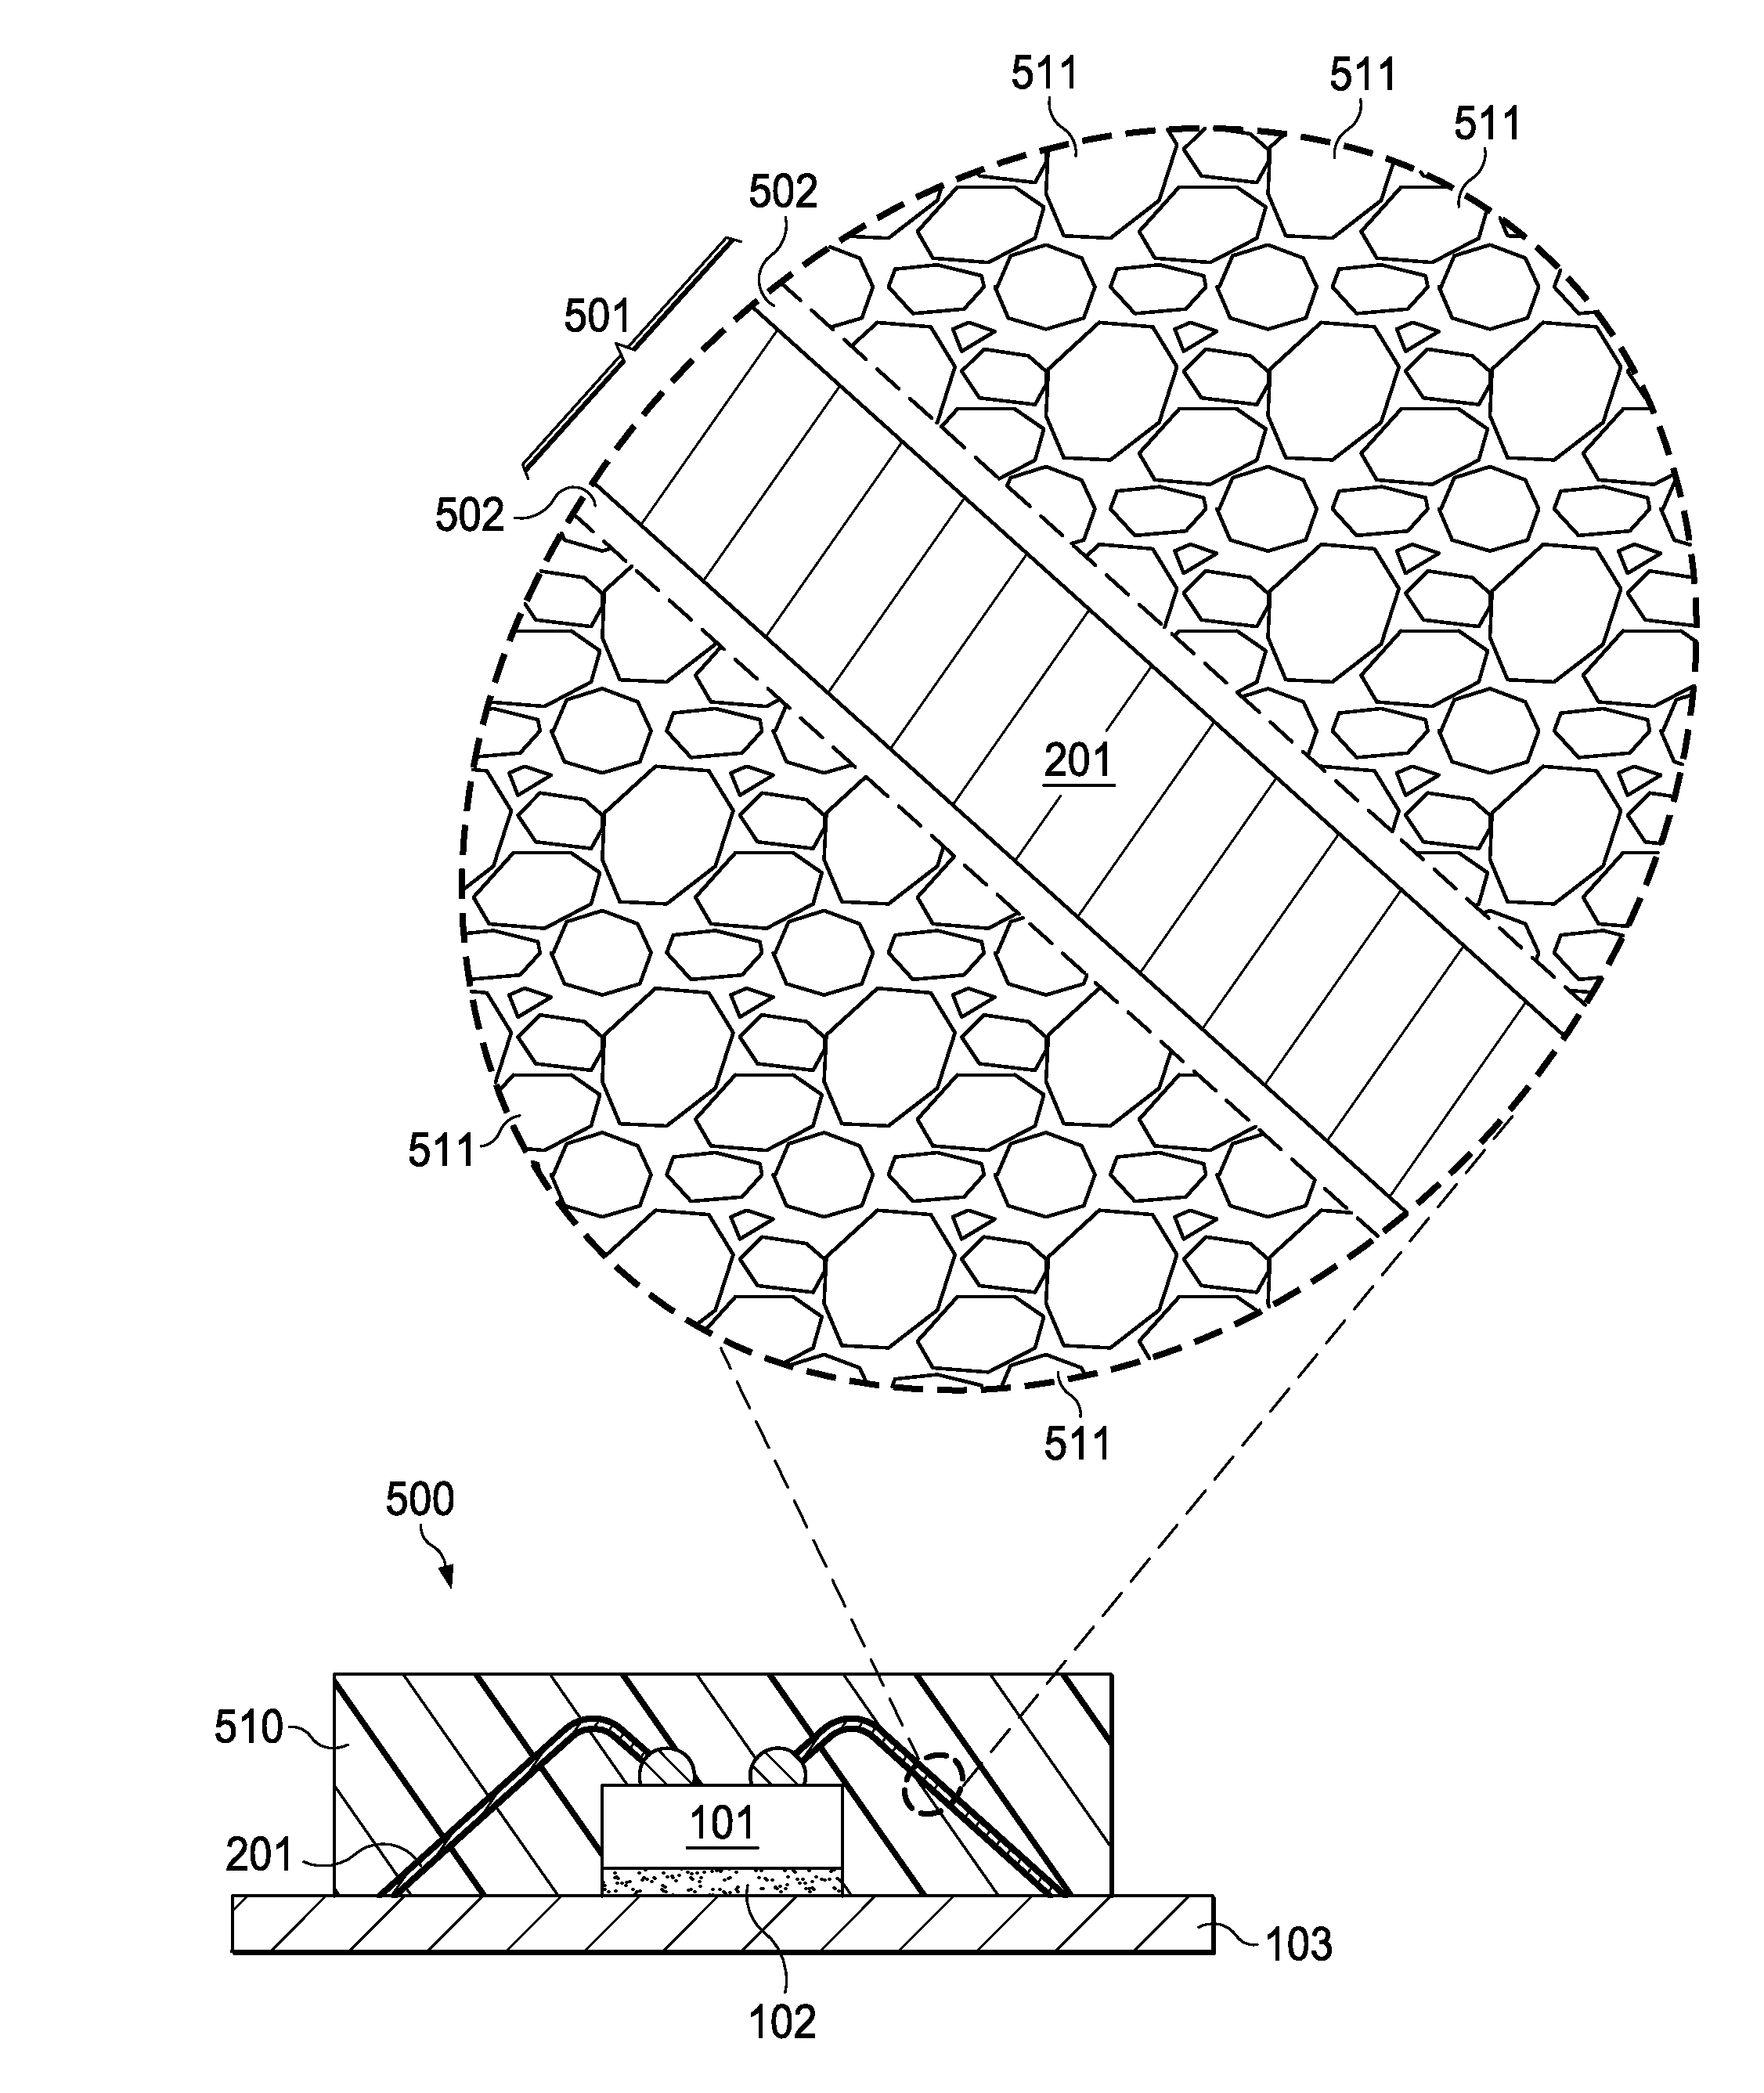 Packaging a semiconductor device having wires with polymerized insulator skin